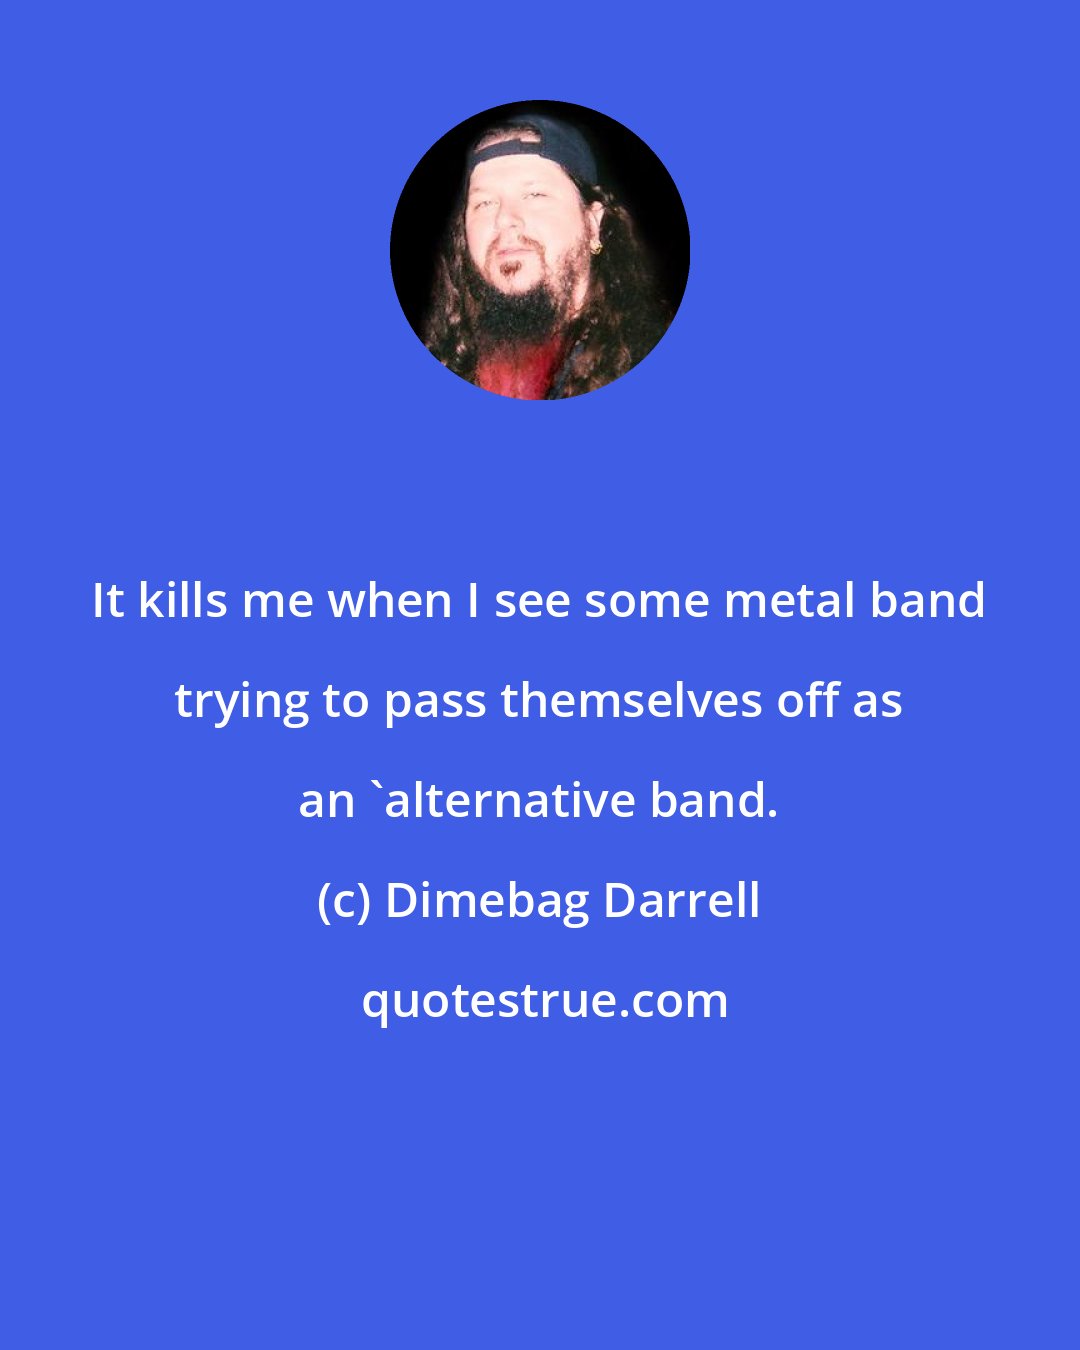 Dimebag Darrell: It kills me when I see some metal band trying to pass themselves off as an 'alternative band.